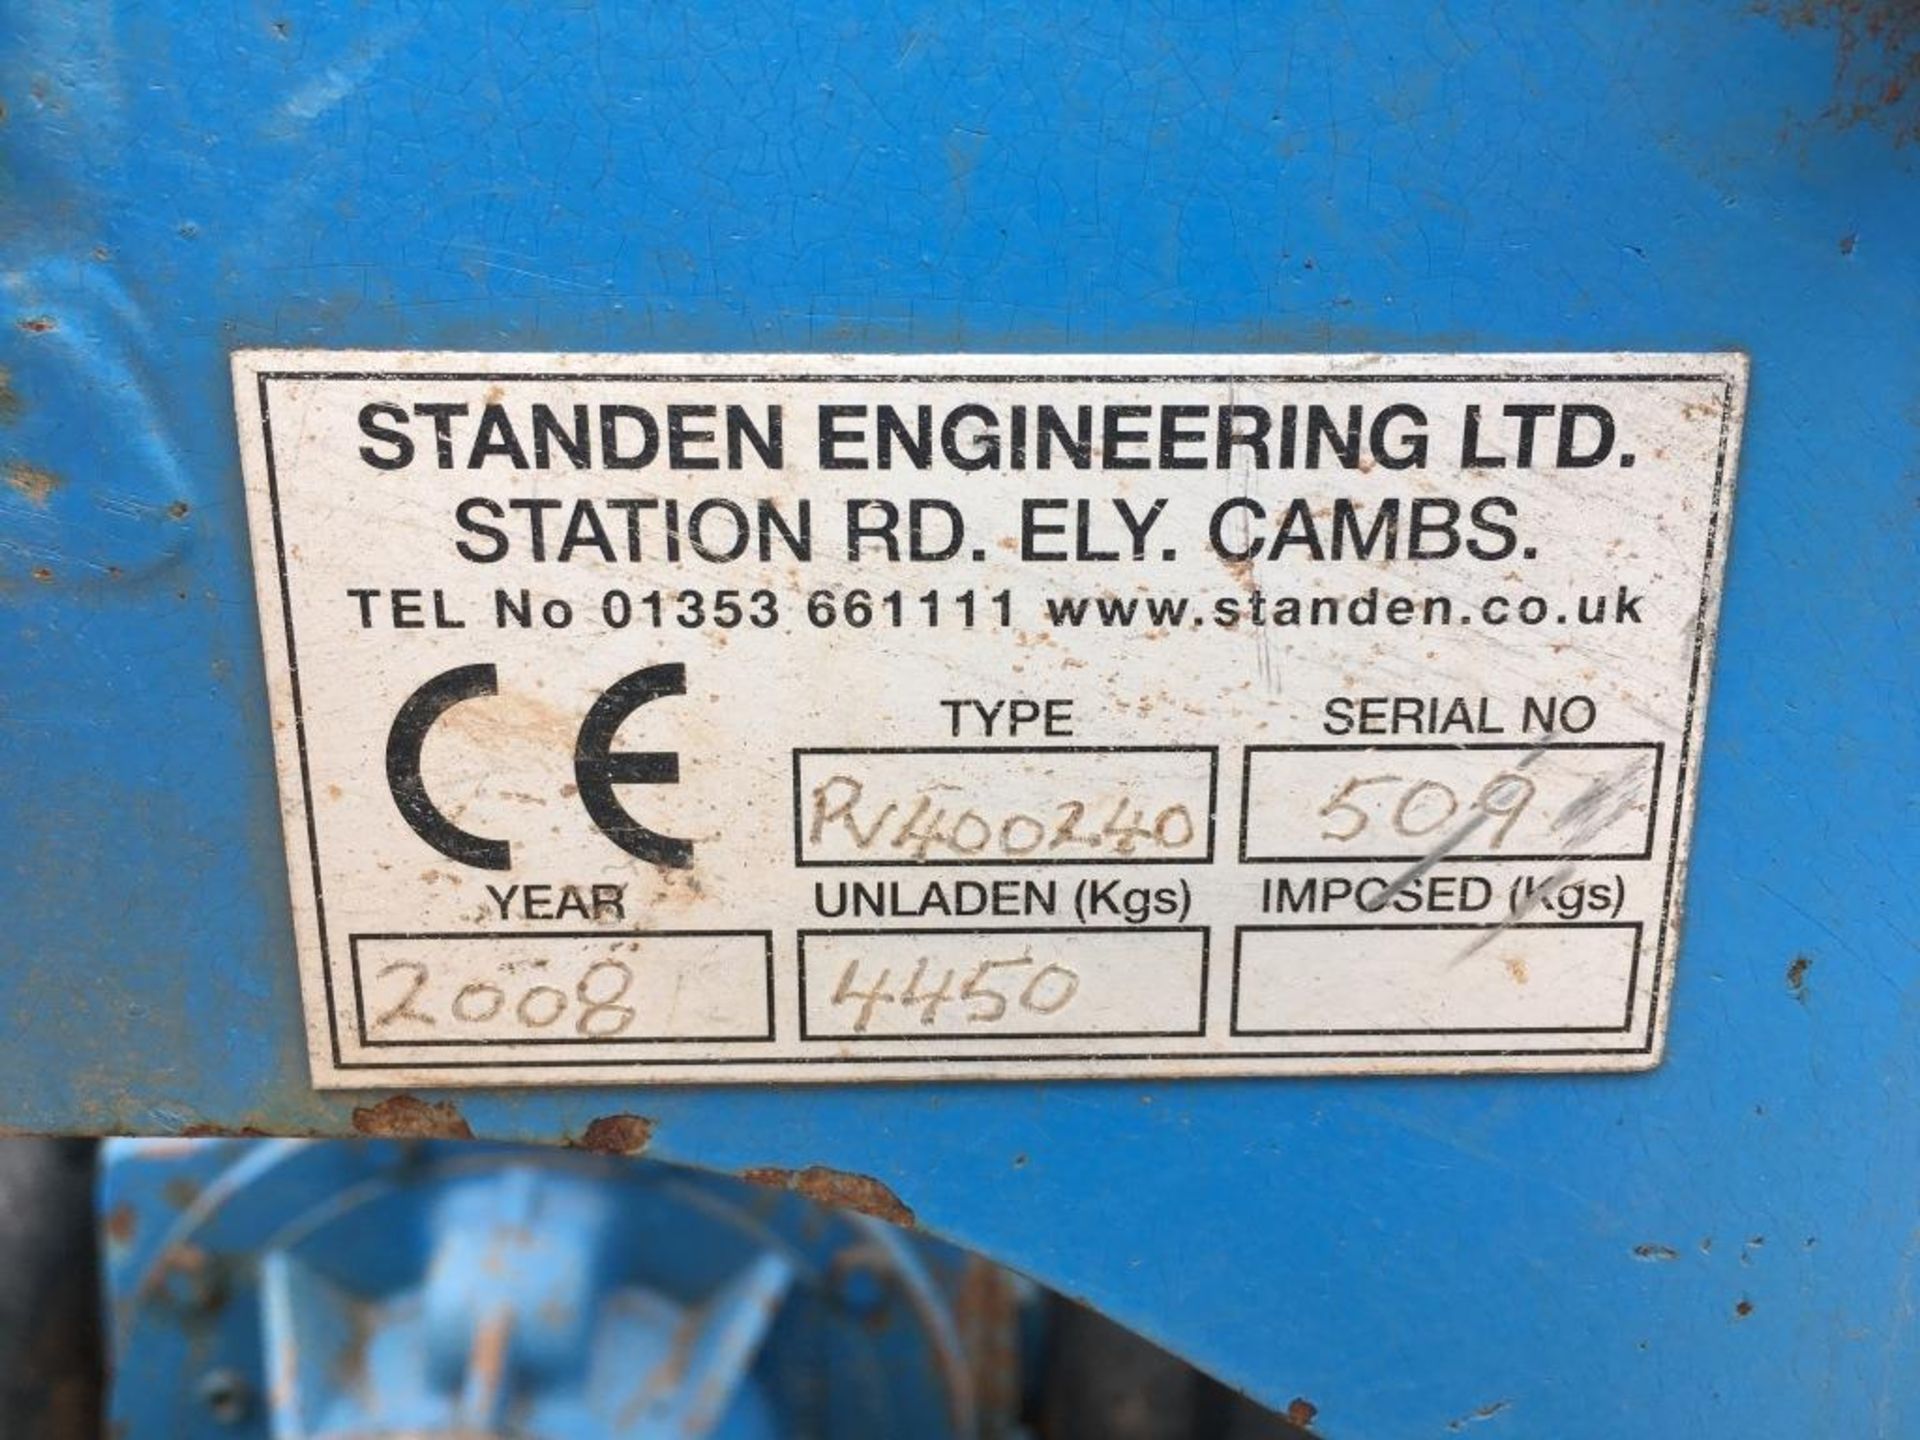 Standen folding rotovator, Type PV400240, serial number: 509 (2008) (missing guarding and damage - Image 16 of 16